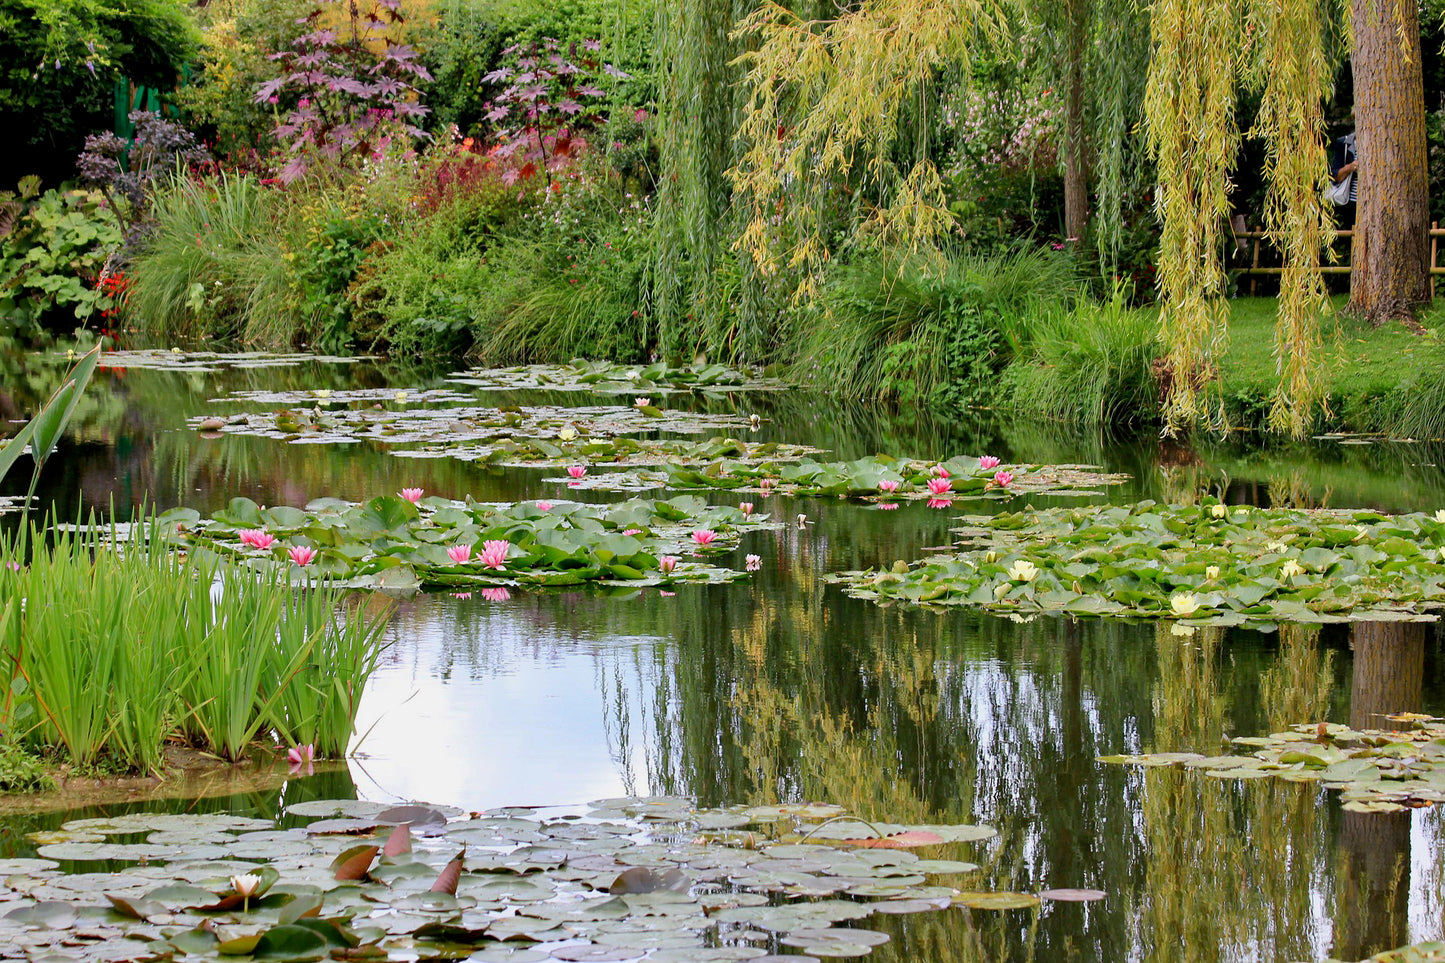 Small-Group Giverny Half-Day Tour from Paris via Mercedes (2-7 People)